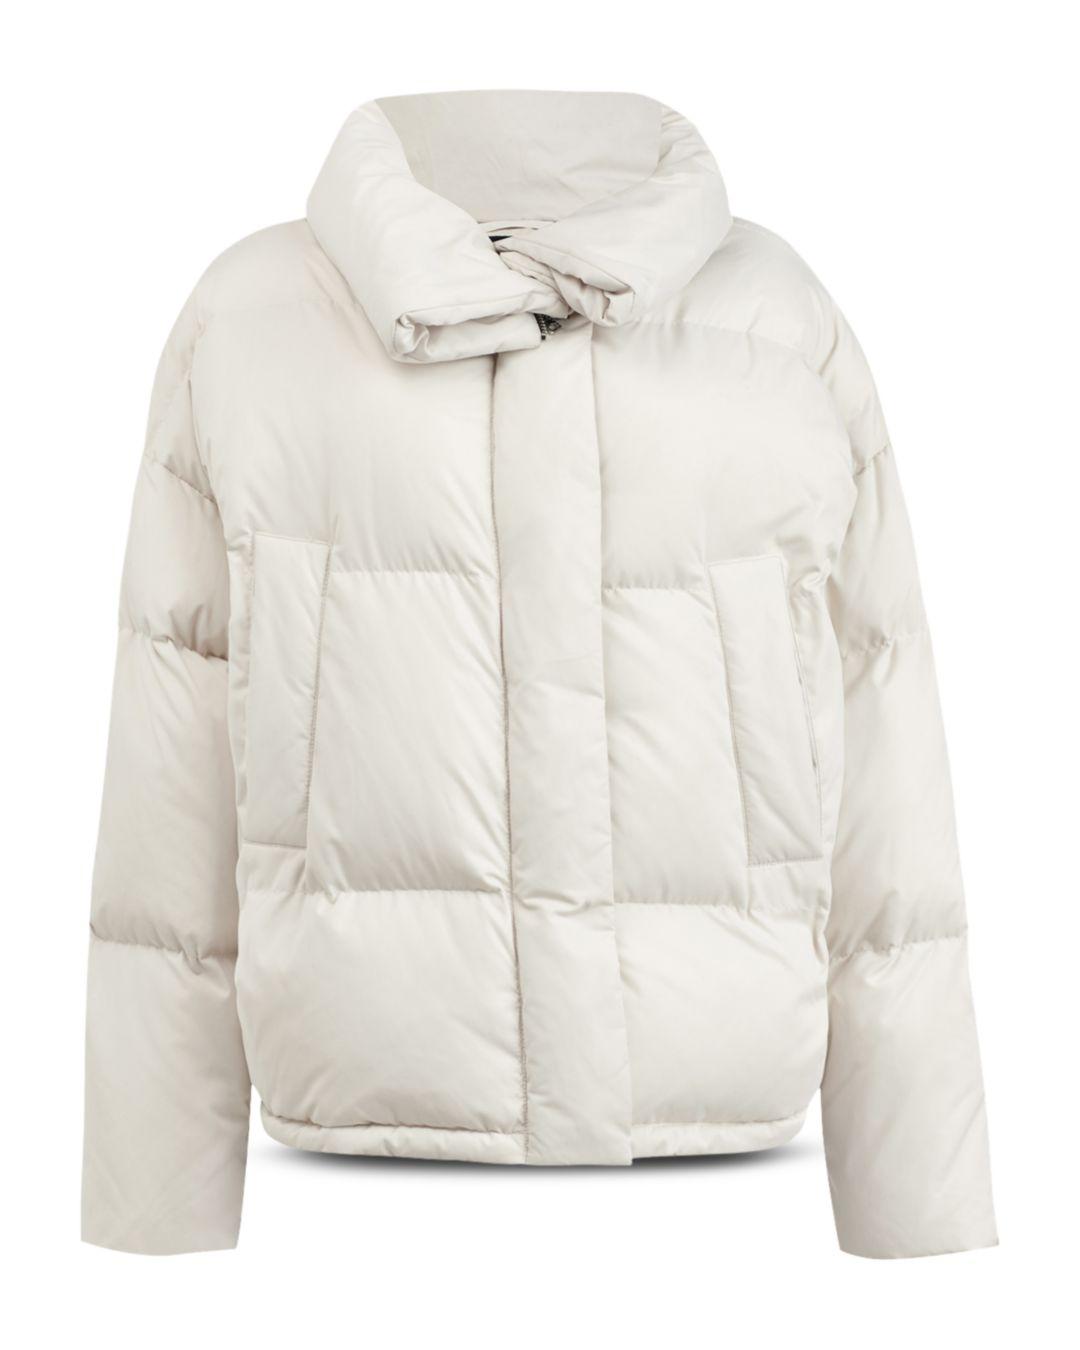 AllSaints Synthetic Piper Puffer Jacket in Ecru White (White) - Lyst